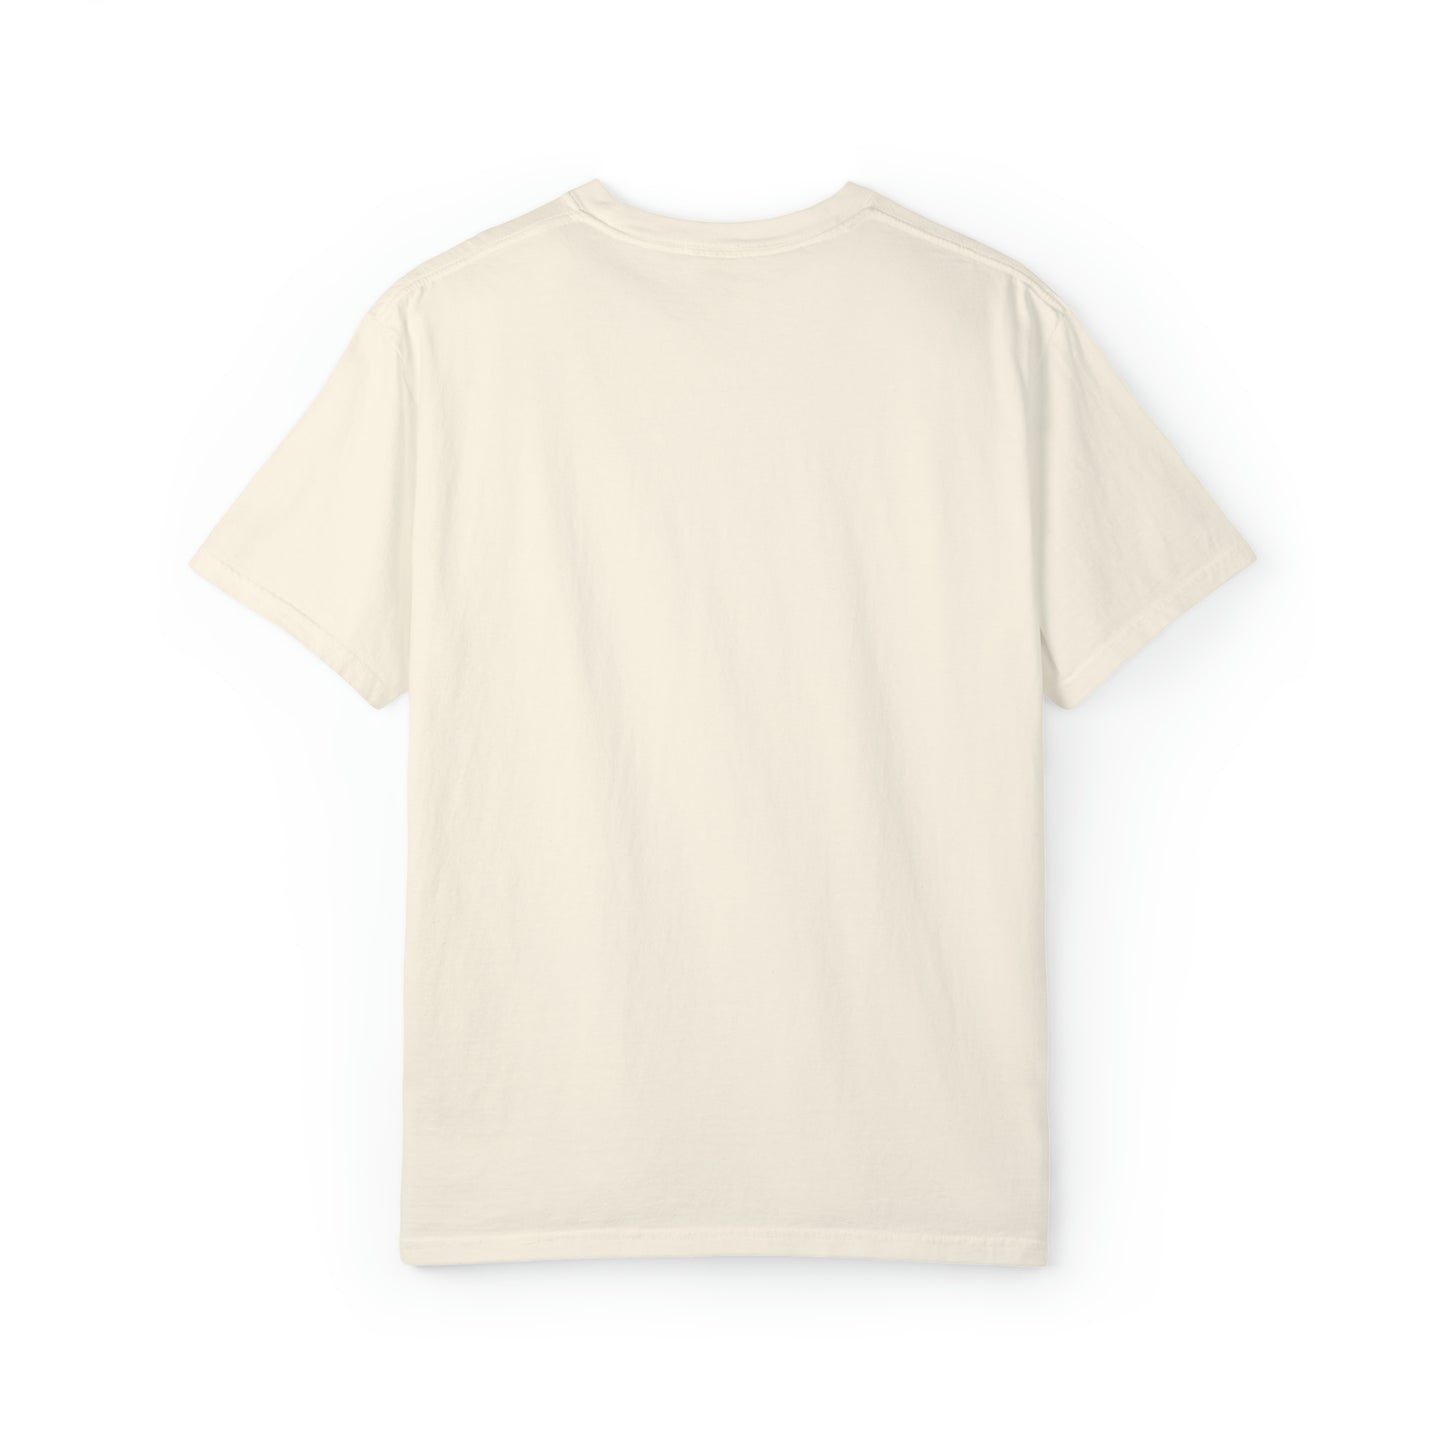 Copy of Copy of Copy of Unisex Garment-Dyed T-shirt